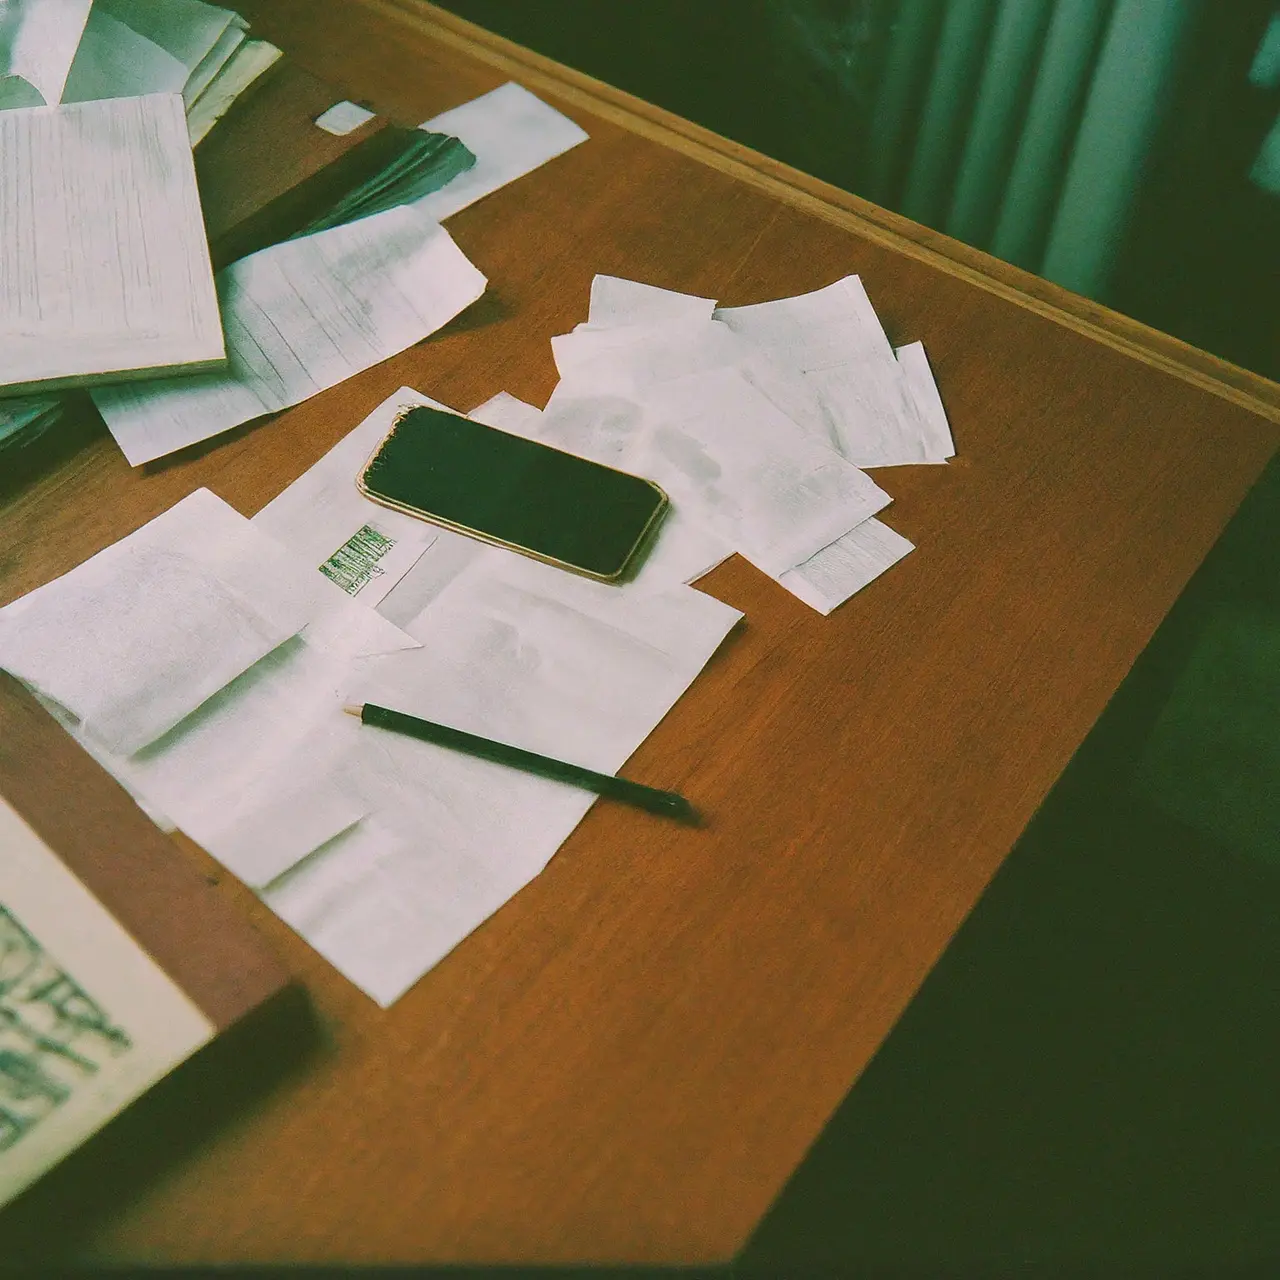 A cluttered desk with scattered receipts and a mobile phone. 35mm stock photo